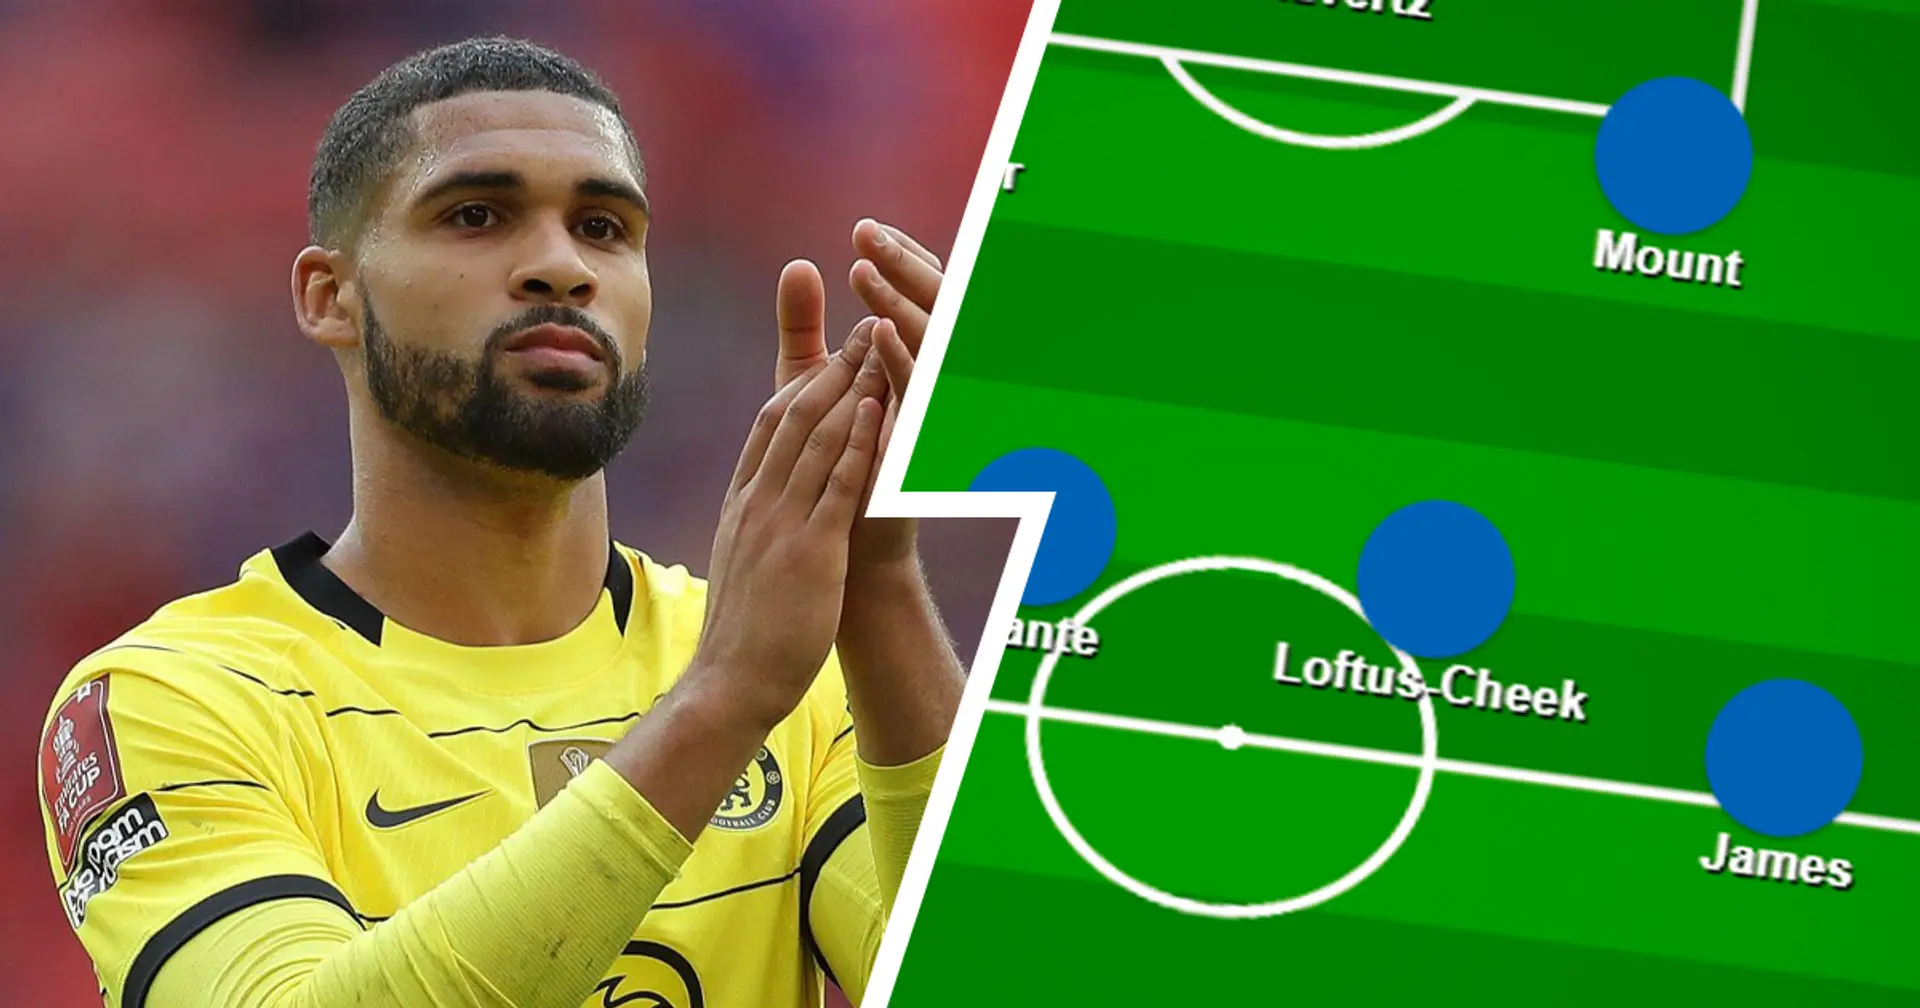 Loftus-Cheek in? Select your preferred Chelsea XI vs Everton from 2 options